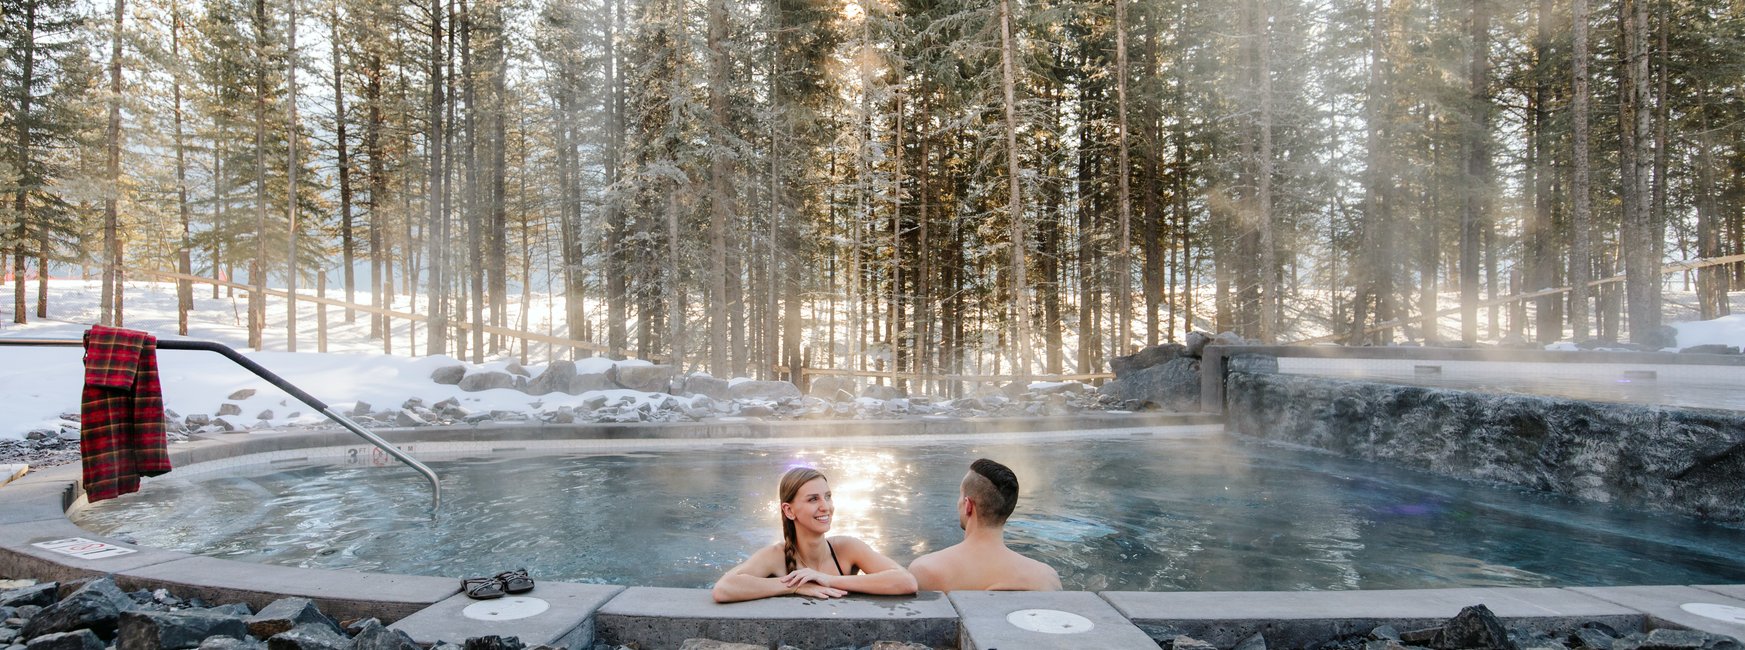 Snow scene with a couple soaking in an outdoor hot pool in the woods. Kananaskis Nordic Spa at the Pomeroy Kananaskis Mountain Lodge. Canadian Rockies.